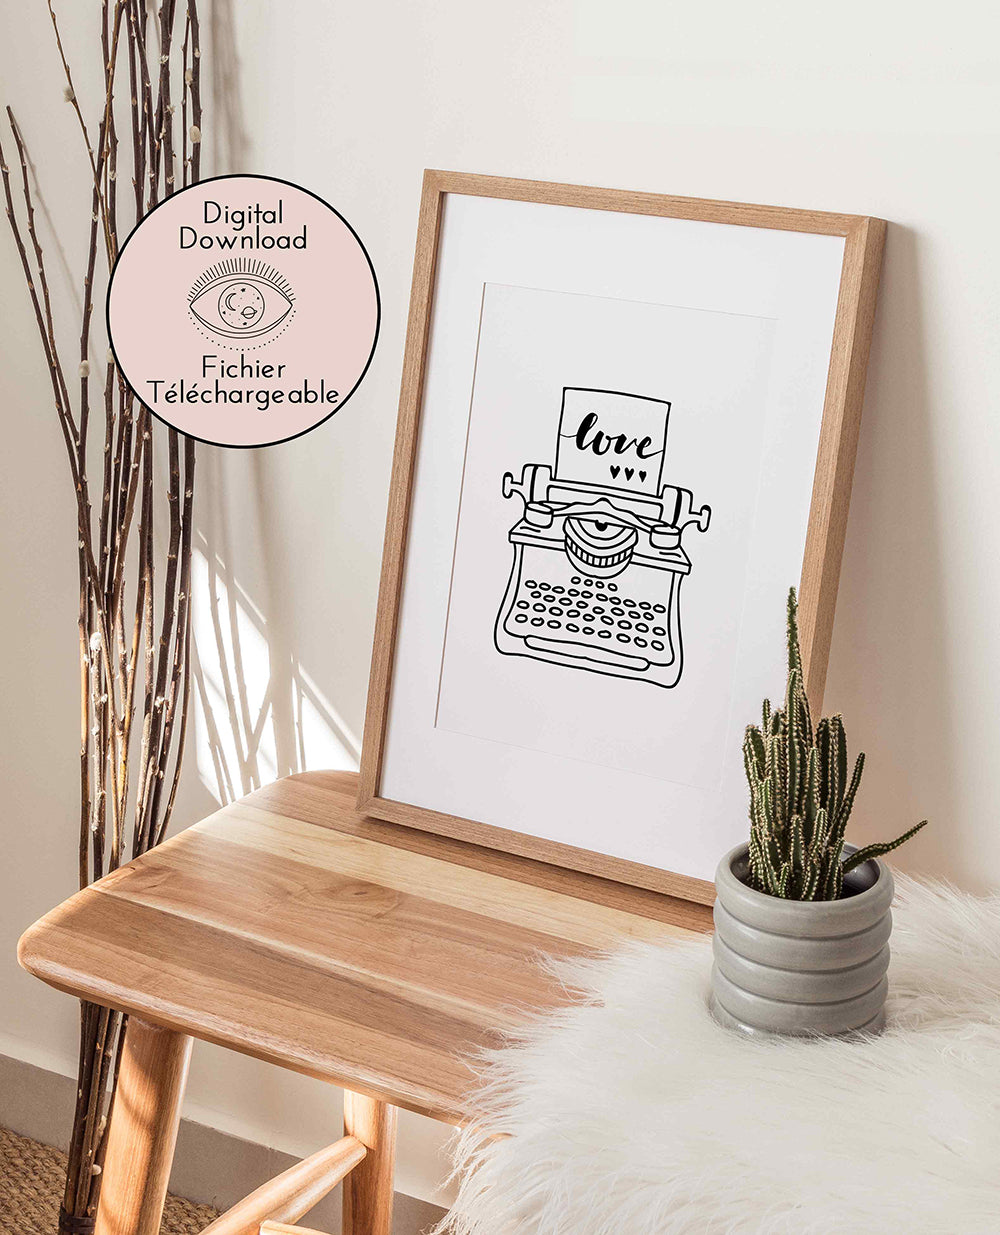 "Typewriter Love letter - Embrace the simplicity and elegance of typewriter art in your home decor."